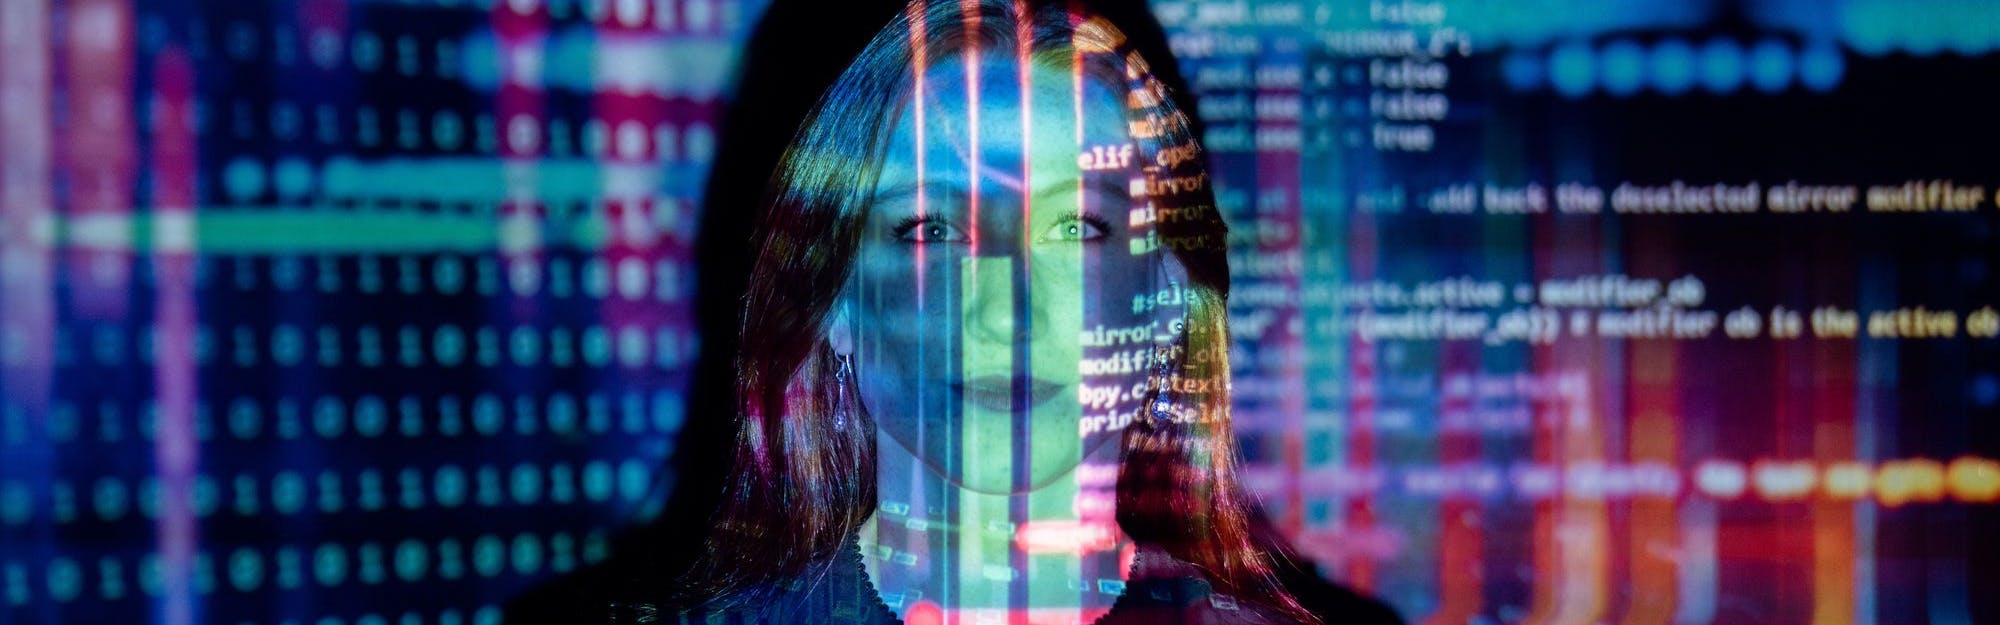 Code projected over woman